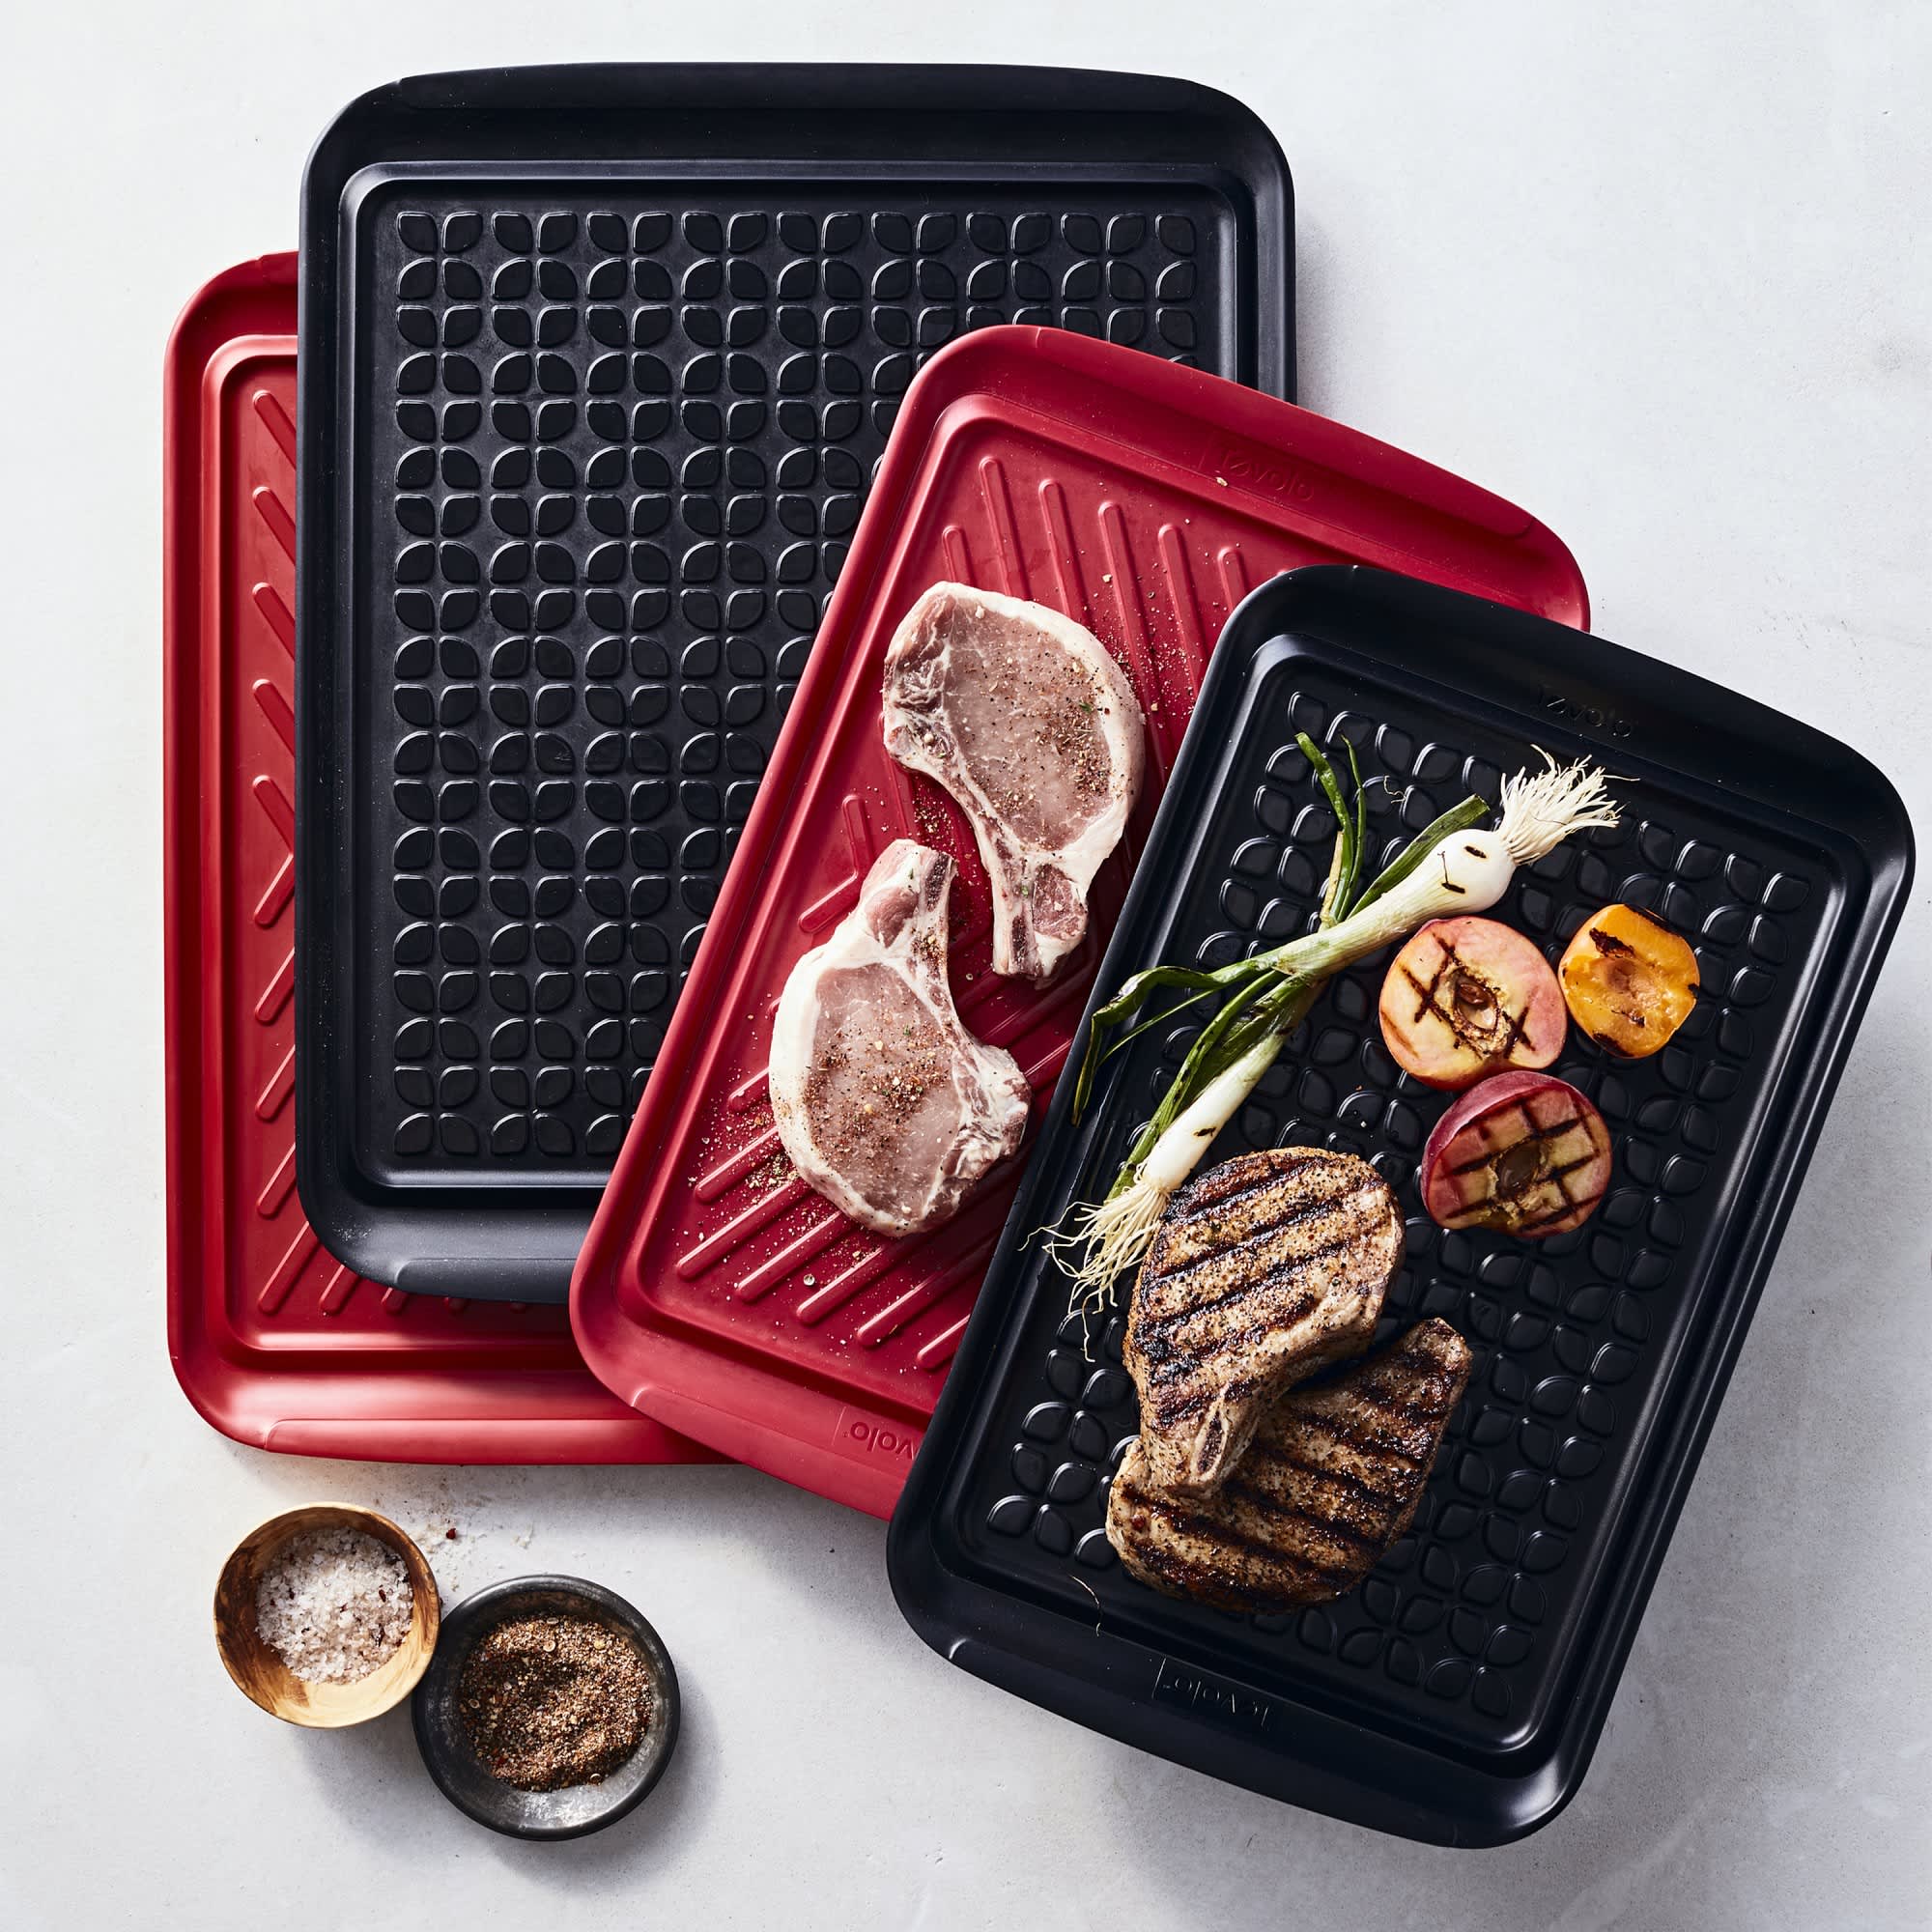 5 Williams Sonoma Bestsellers That Will Cut Meal Prep in Half